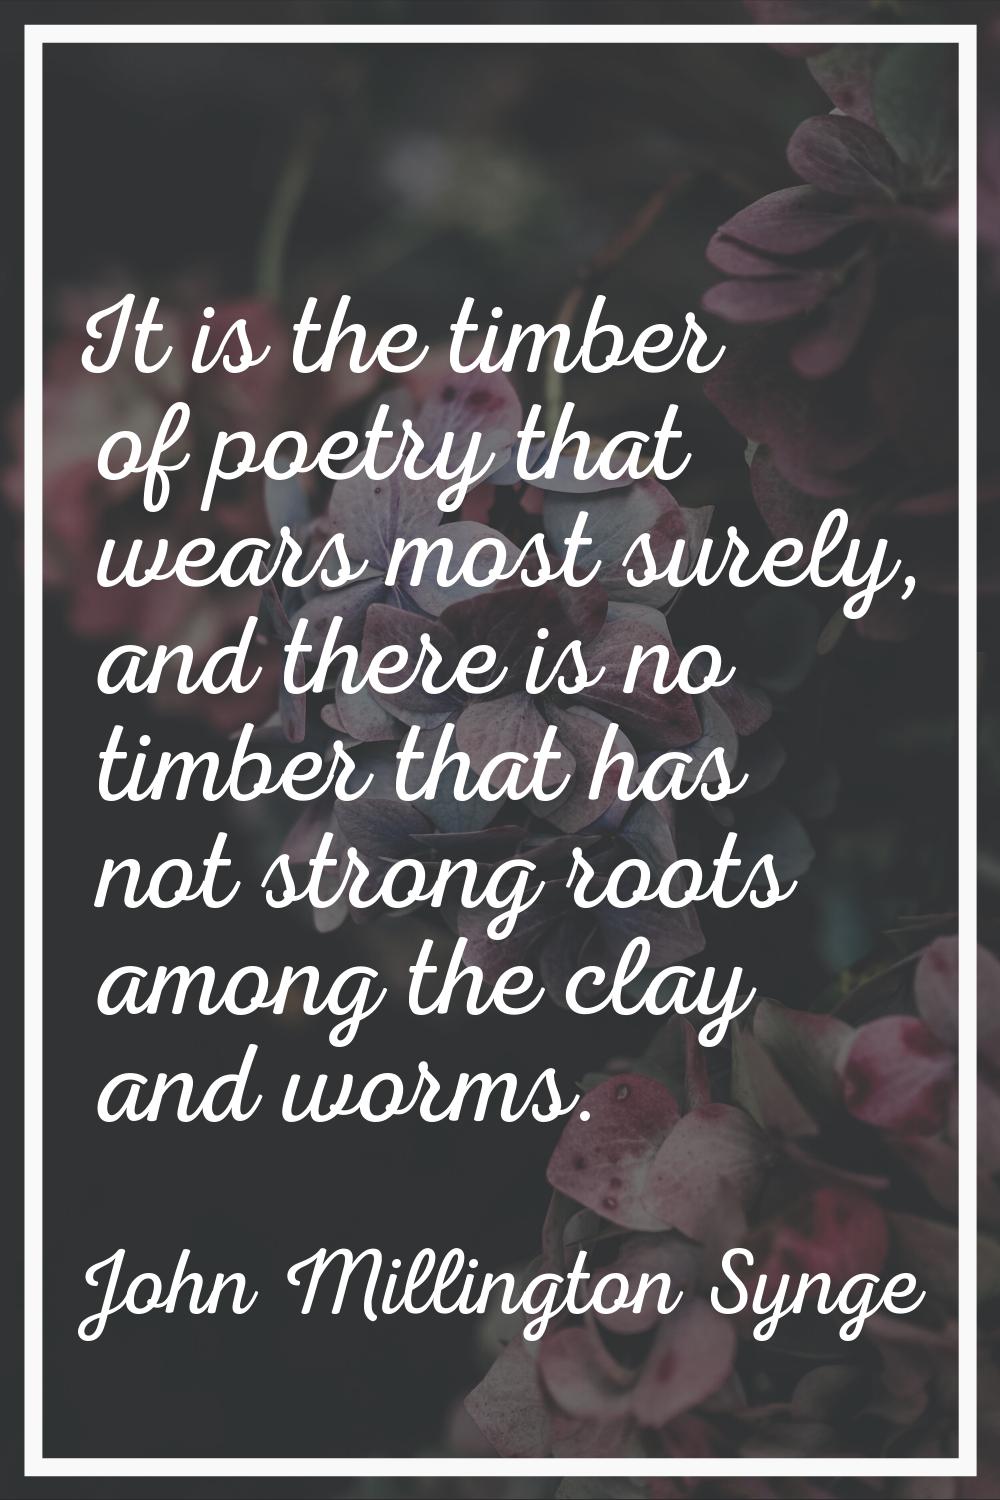 It is the timber of poetry that wears most surely, and there is no timber that has not strong roots